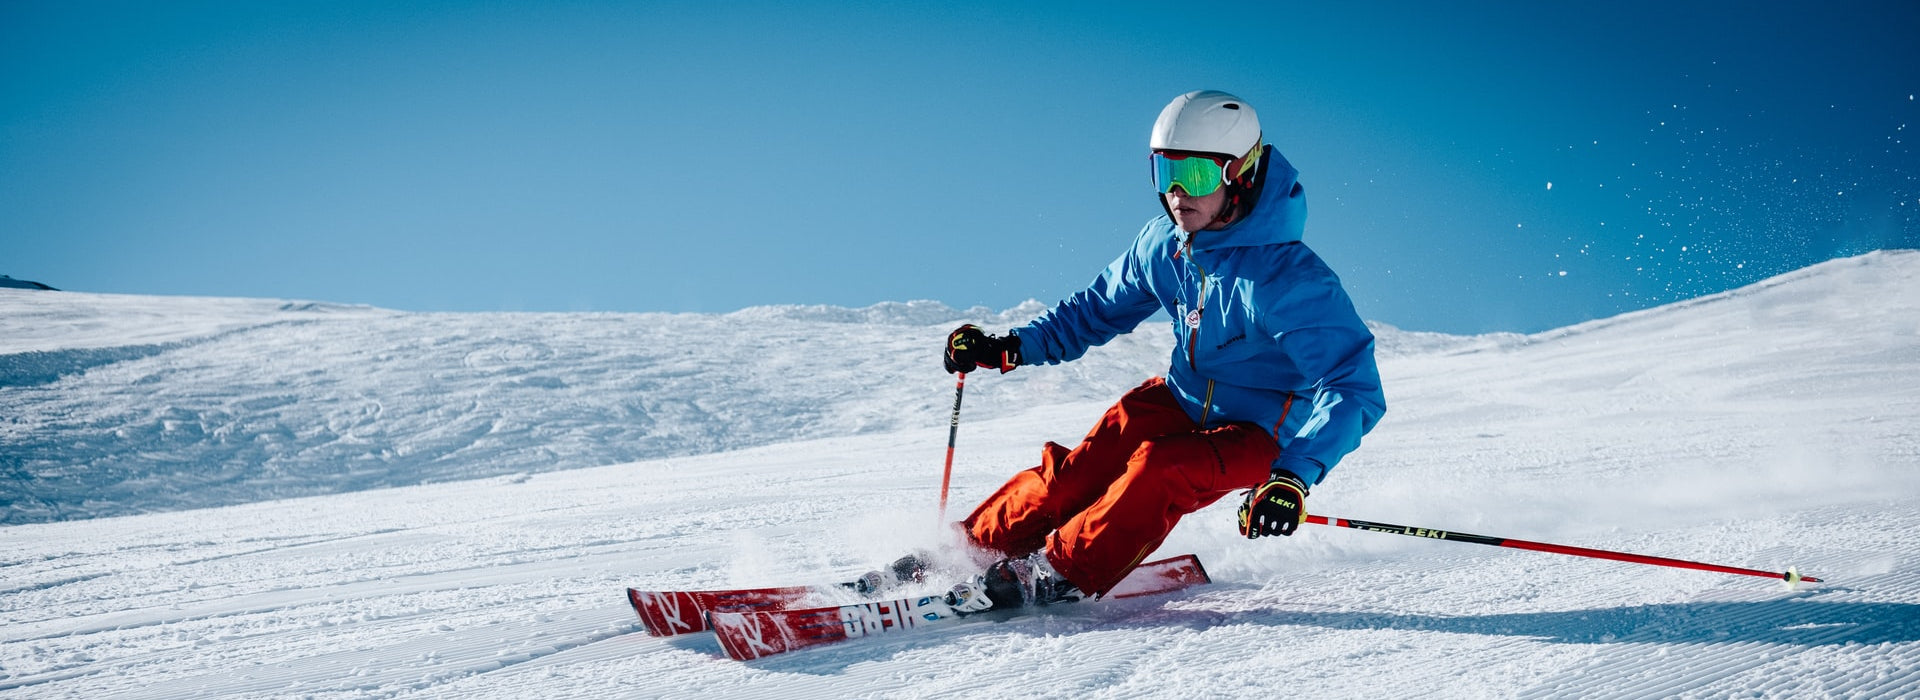 Hero image featuring a person in a blue ski jacket and red ski pants skiing down the mountain on a bluebird day.